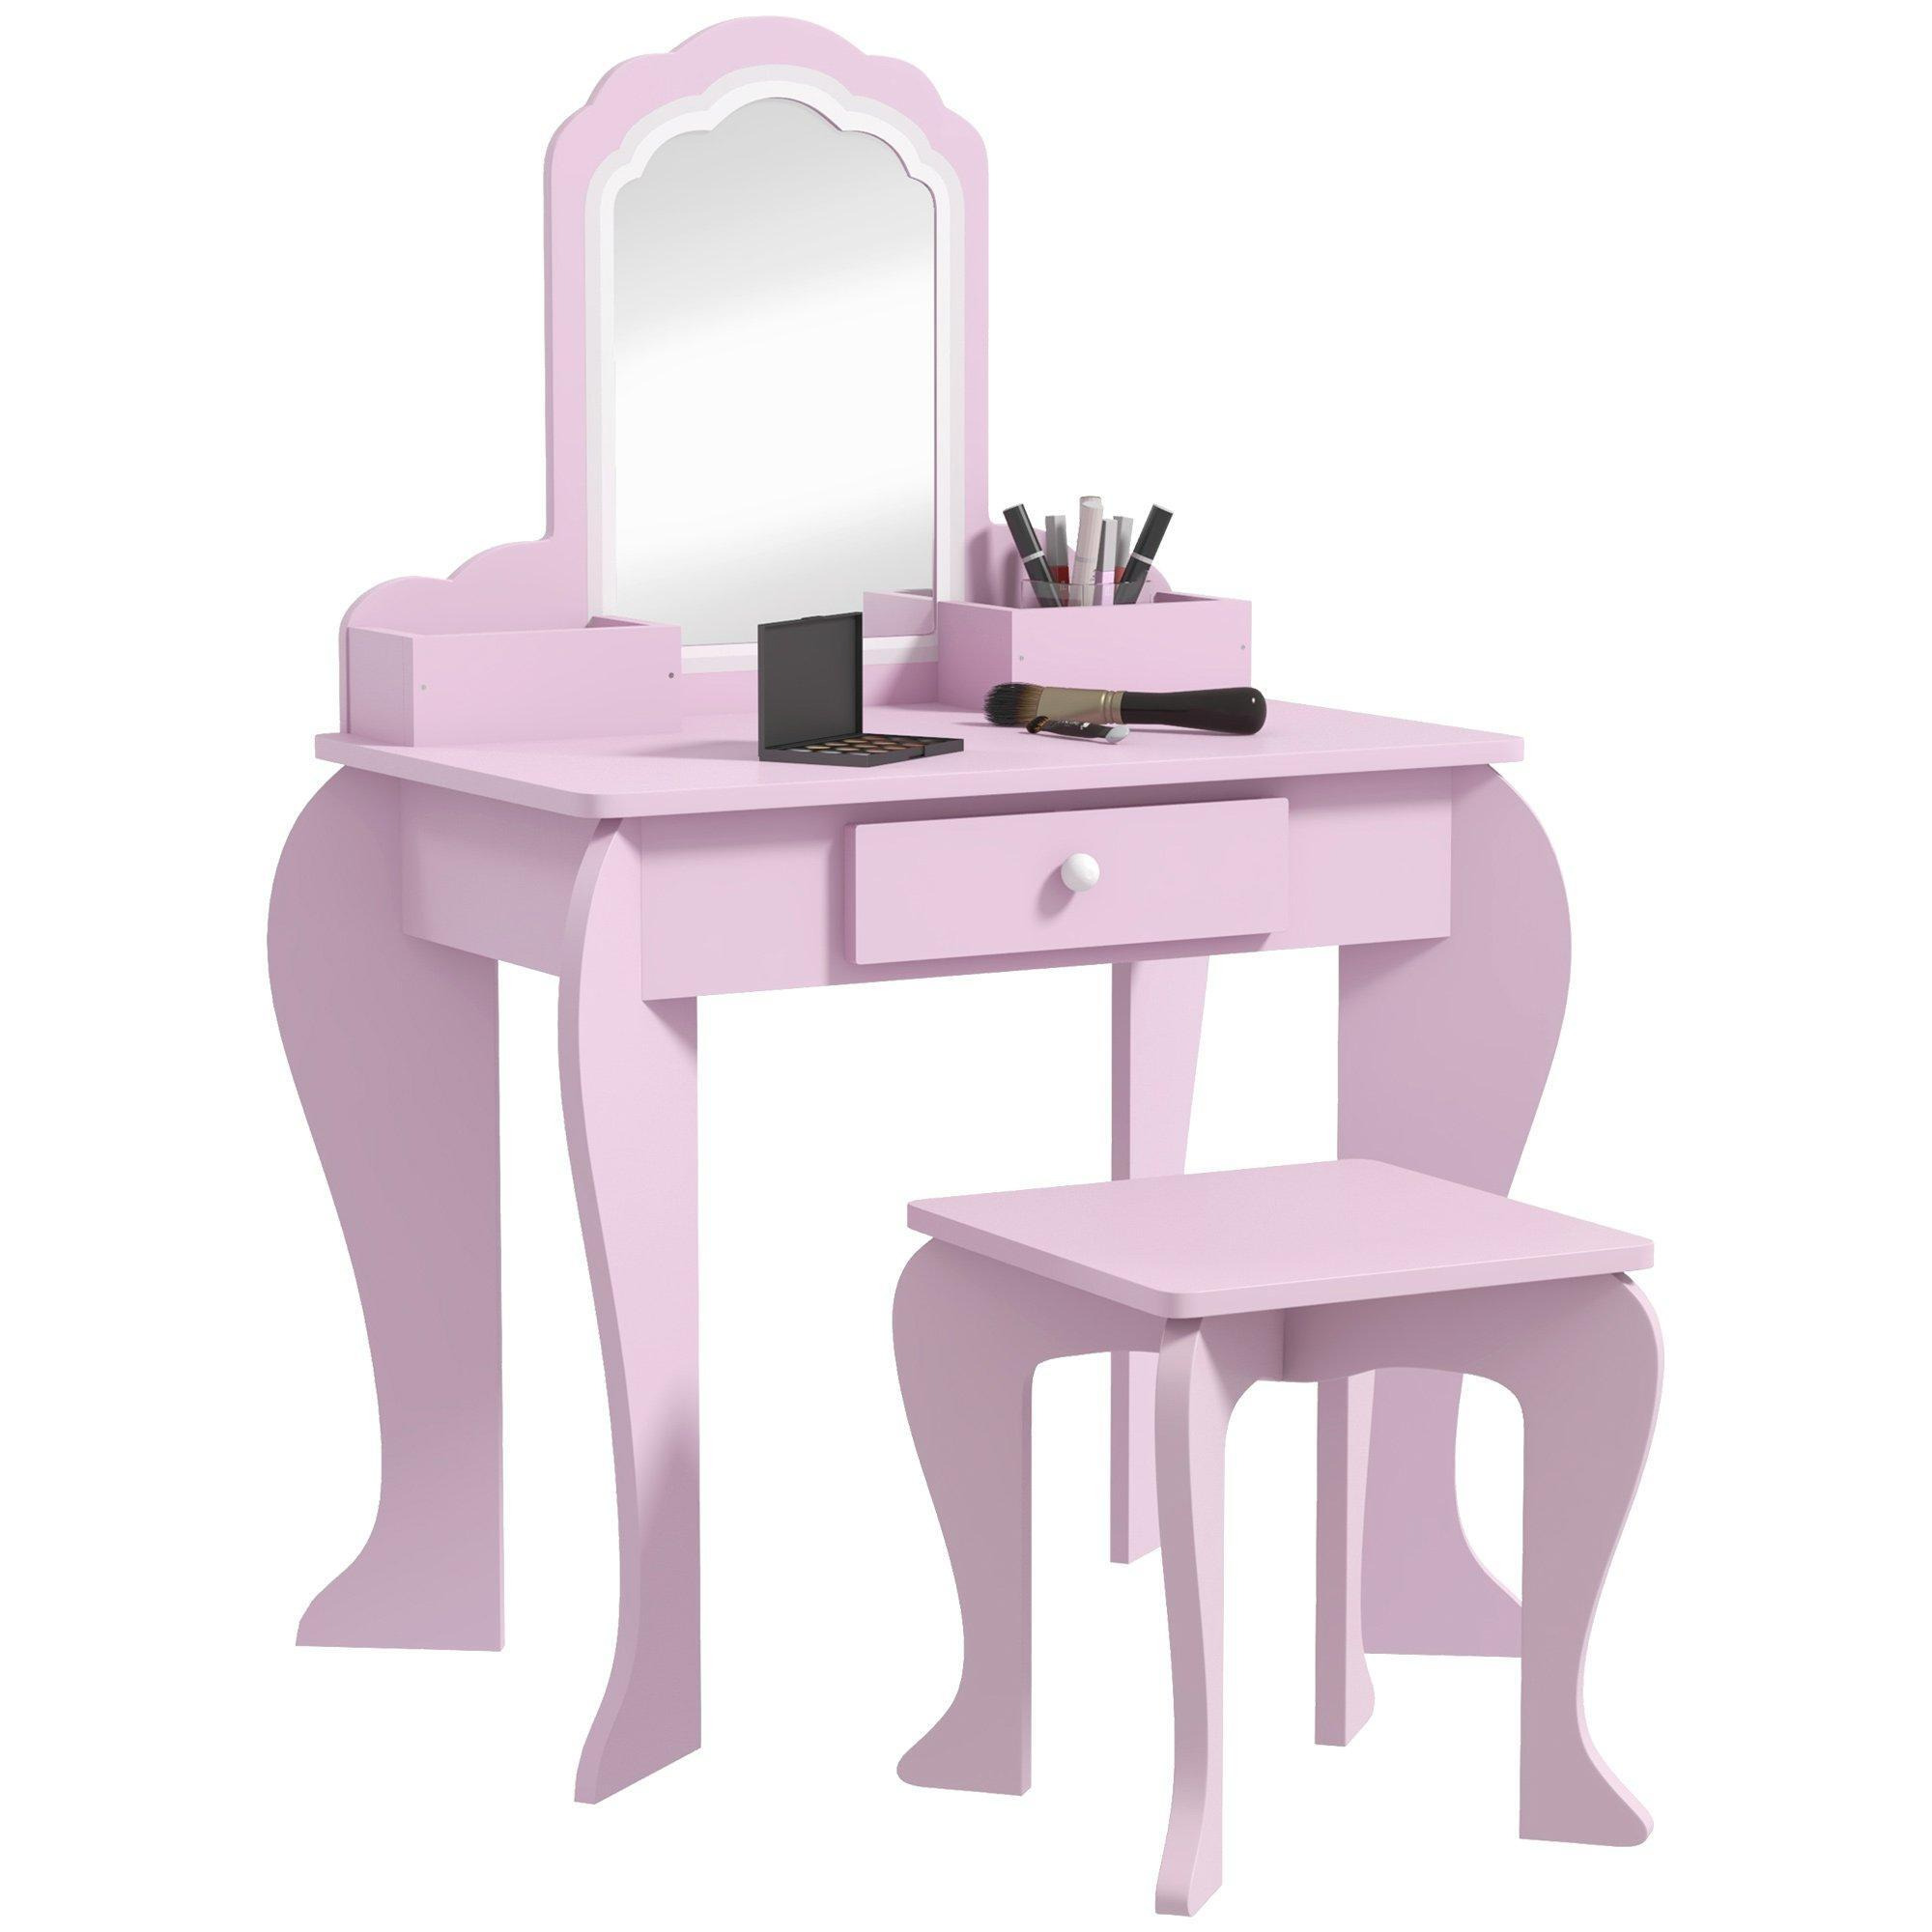 Dressing Table with Mirror and Stool, Drawer, Storage Boxes, Cloud Design - image 1